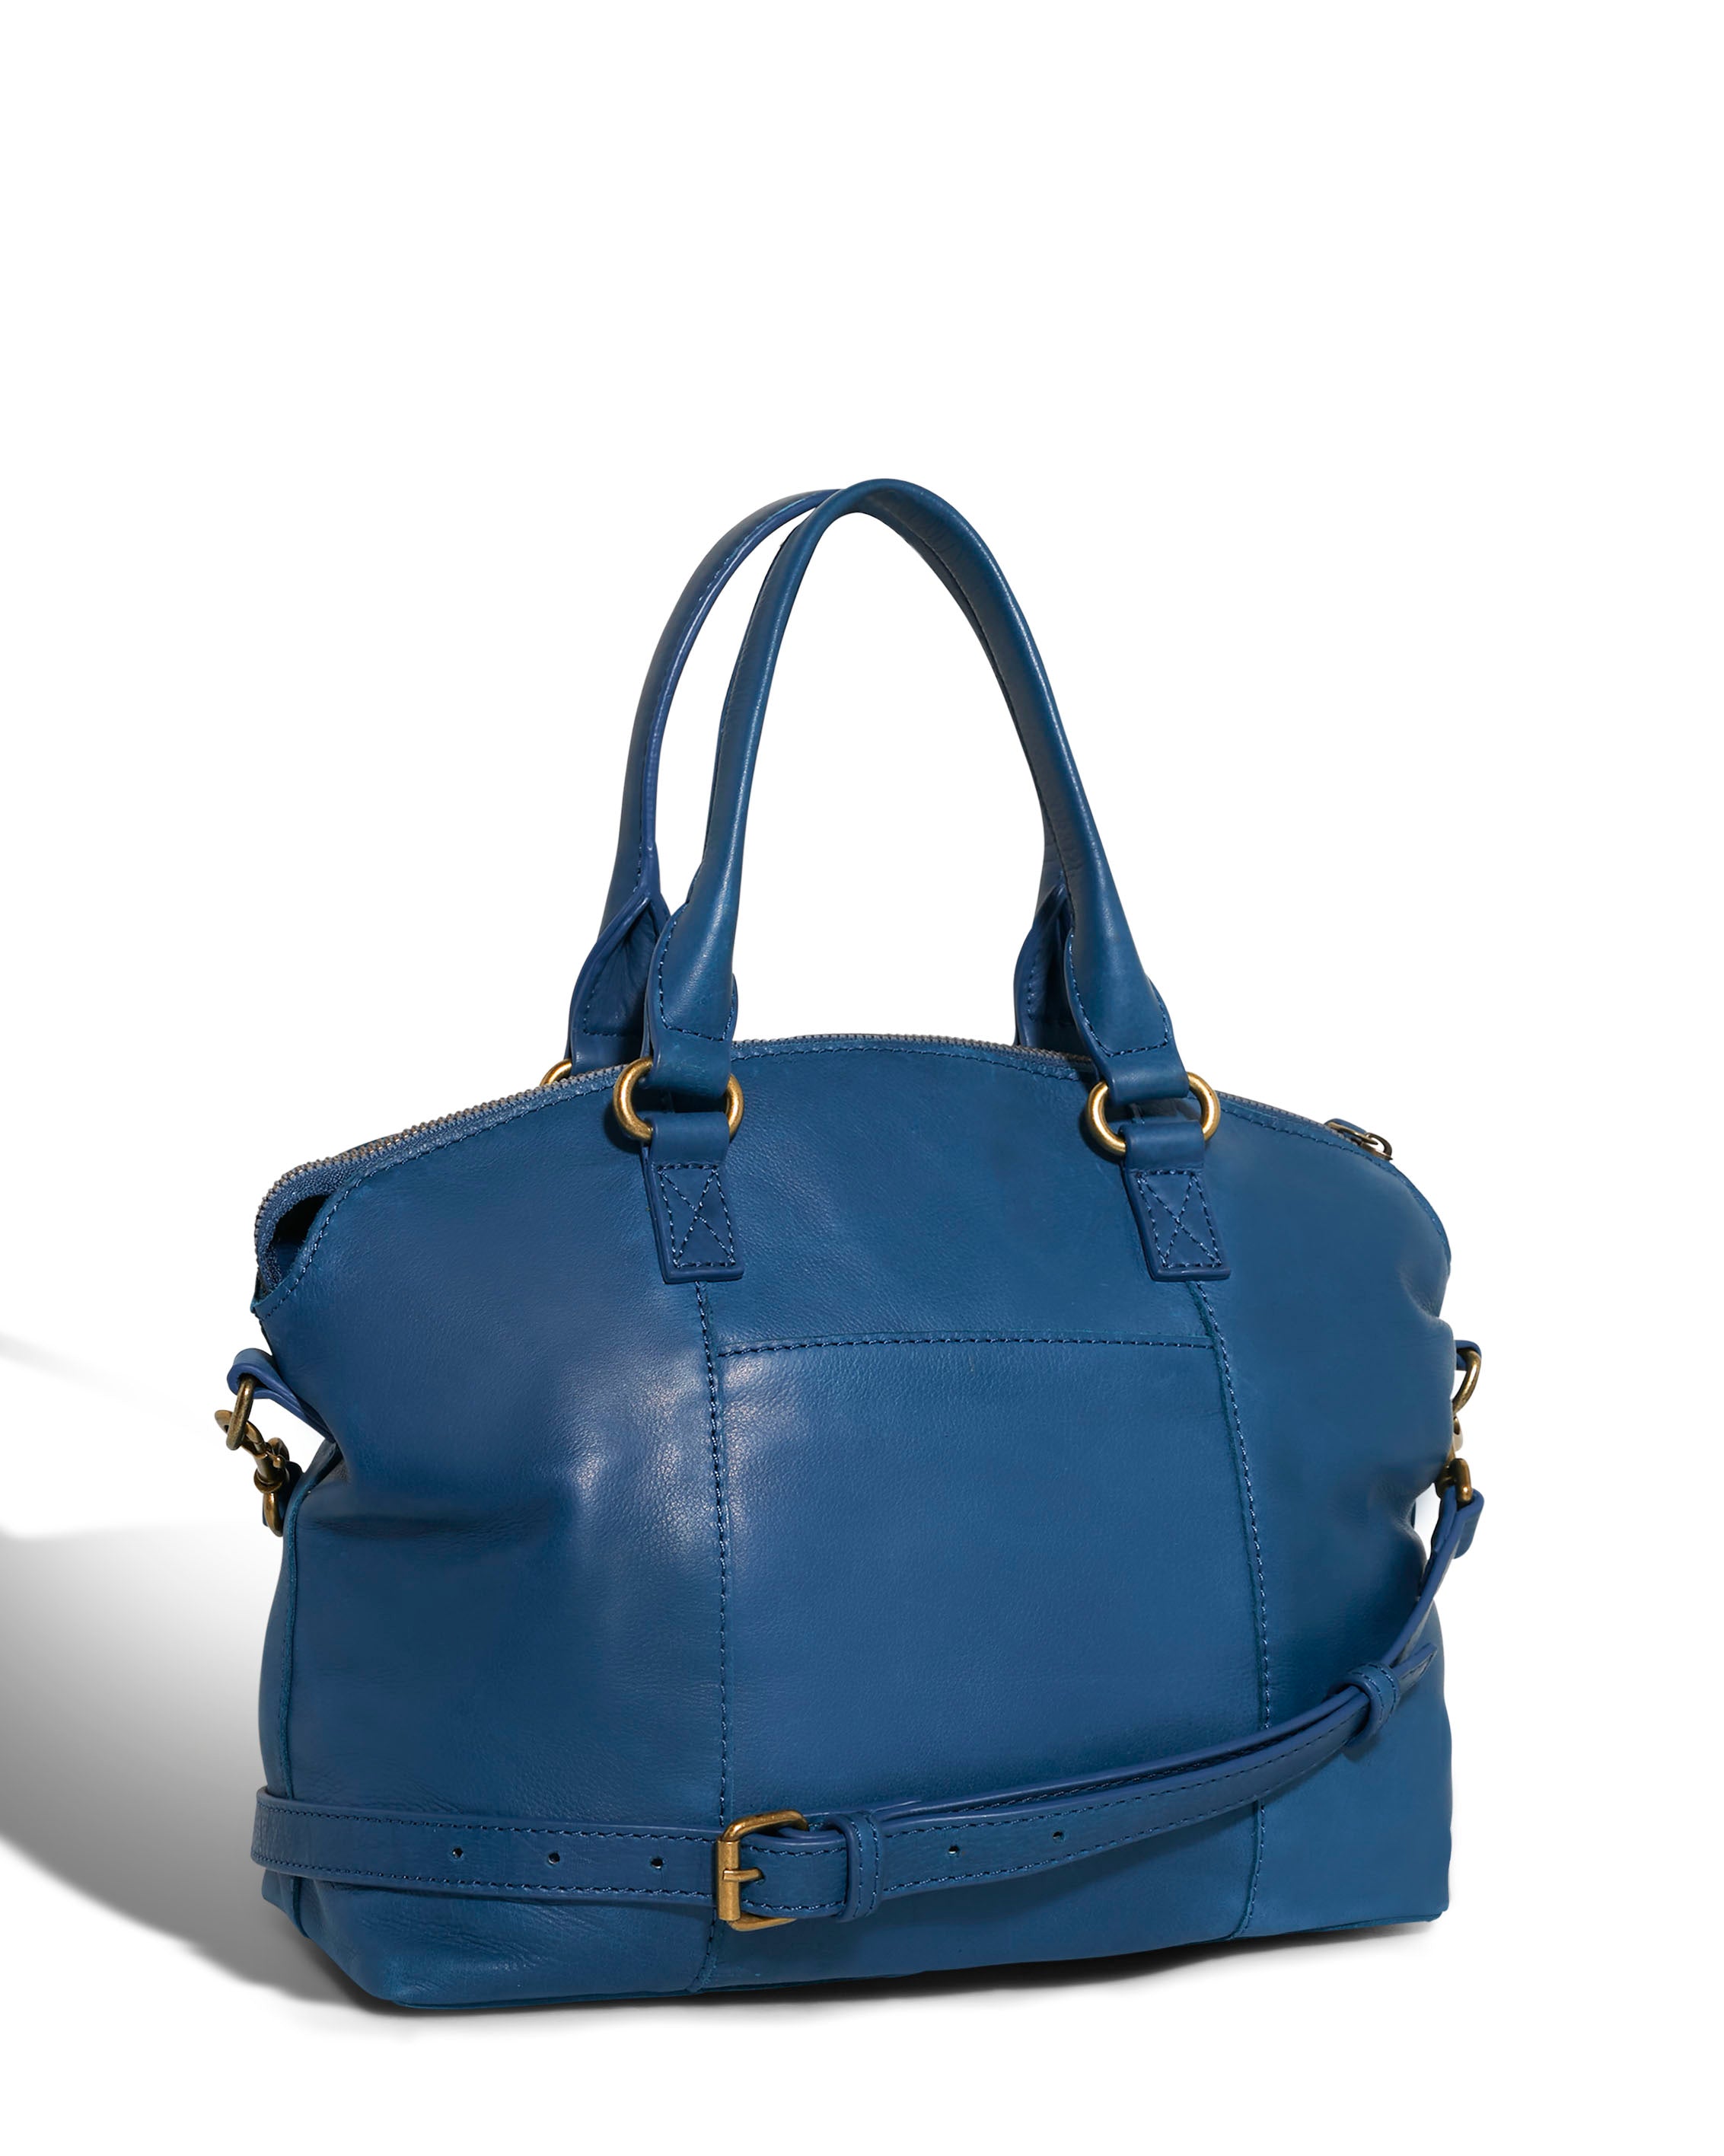 American Leather Co. Carrie Dome Satchel Midnight Blue